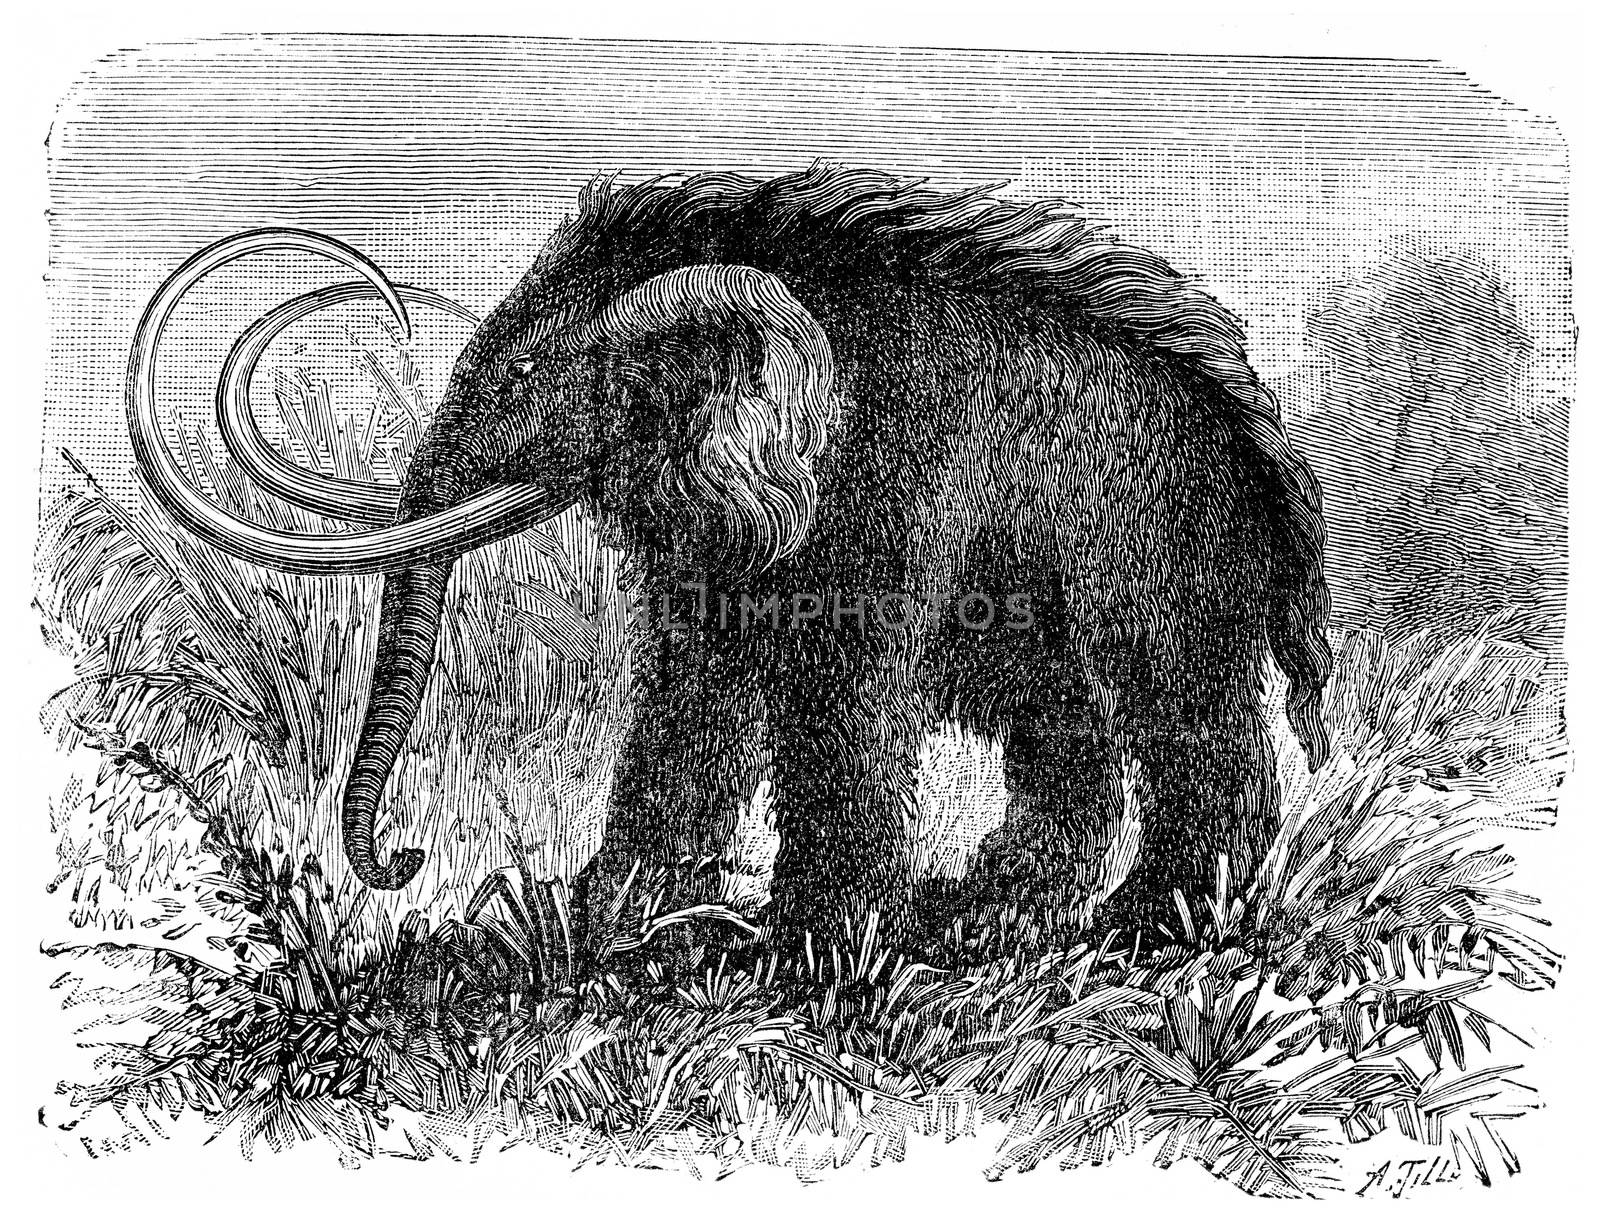 The mammoth, Elephas primigenius, vintage engraving. by Morphart